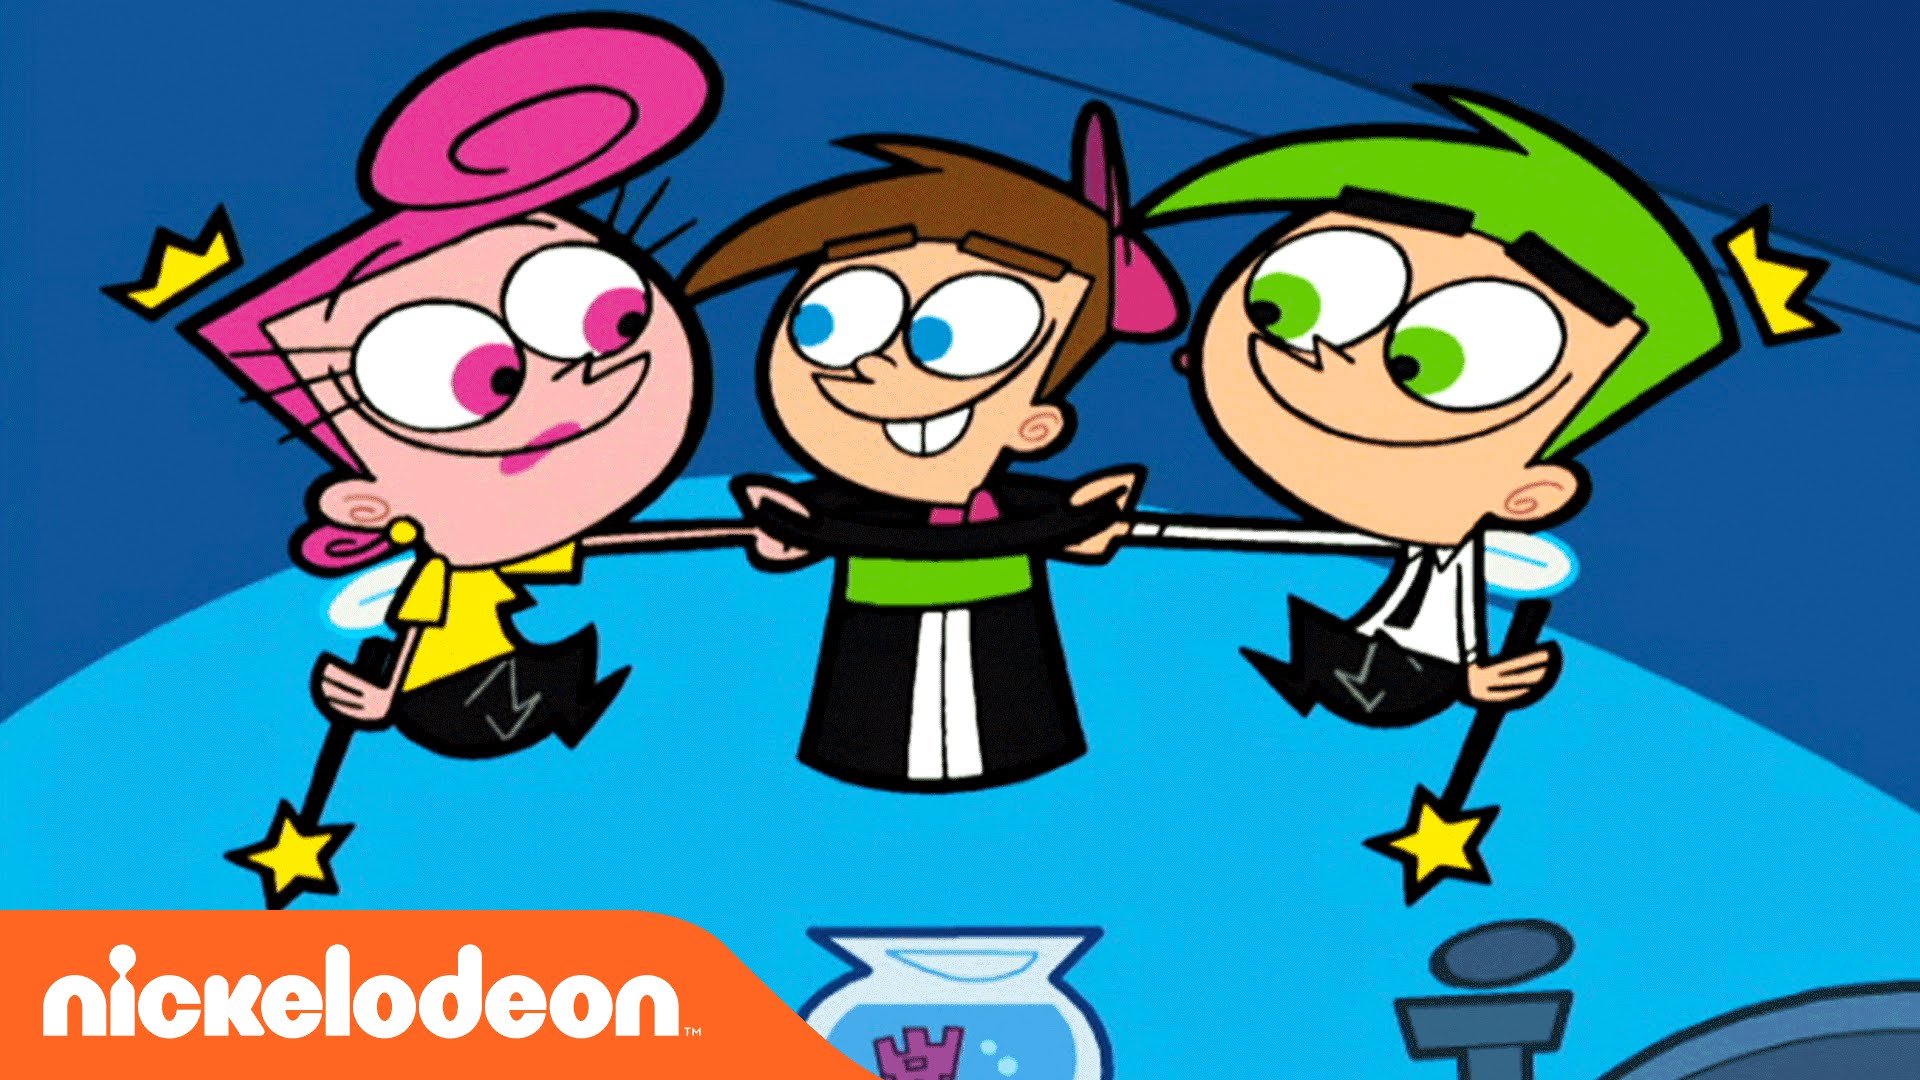 Nice Images Collection: The Fairly OddParents Desktop Wallpapers